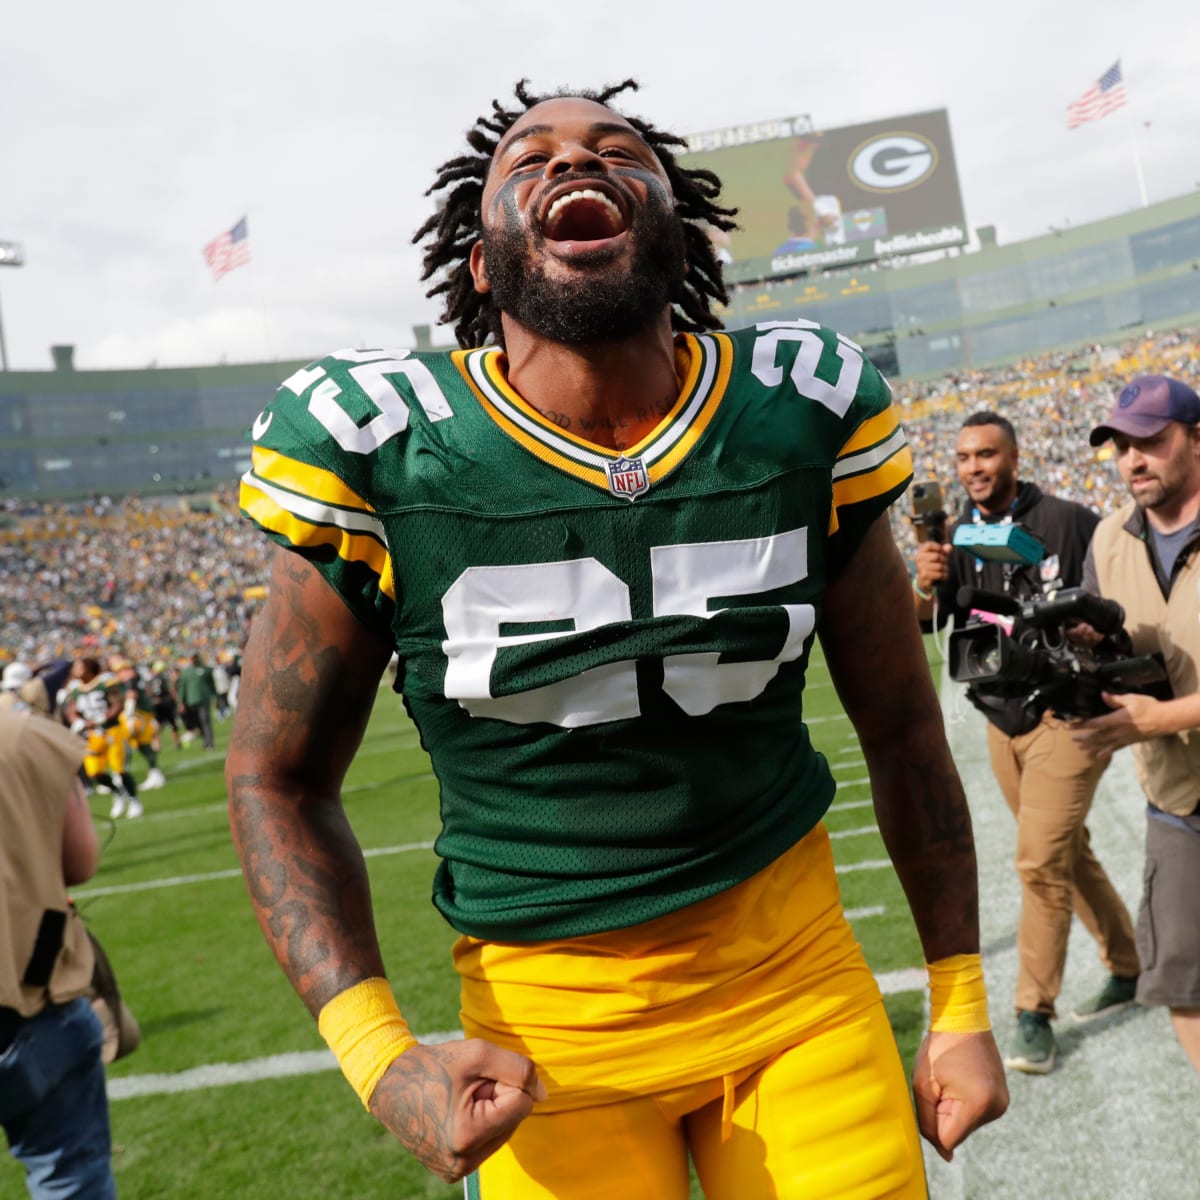 Packers are looking for play-past-the-whistle tough guys